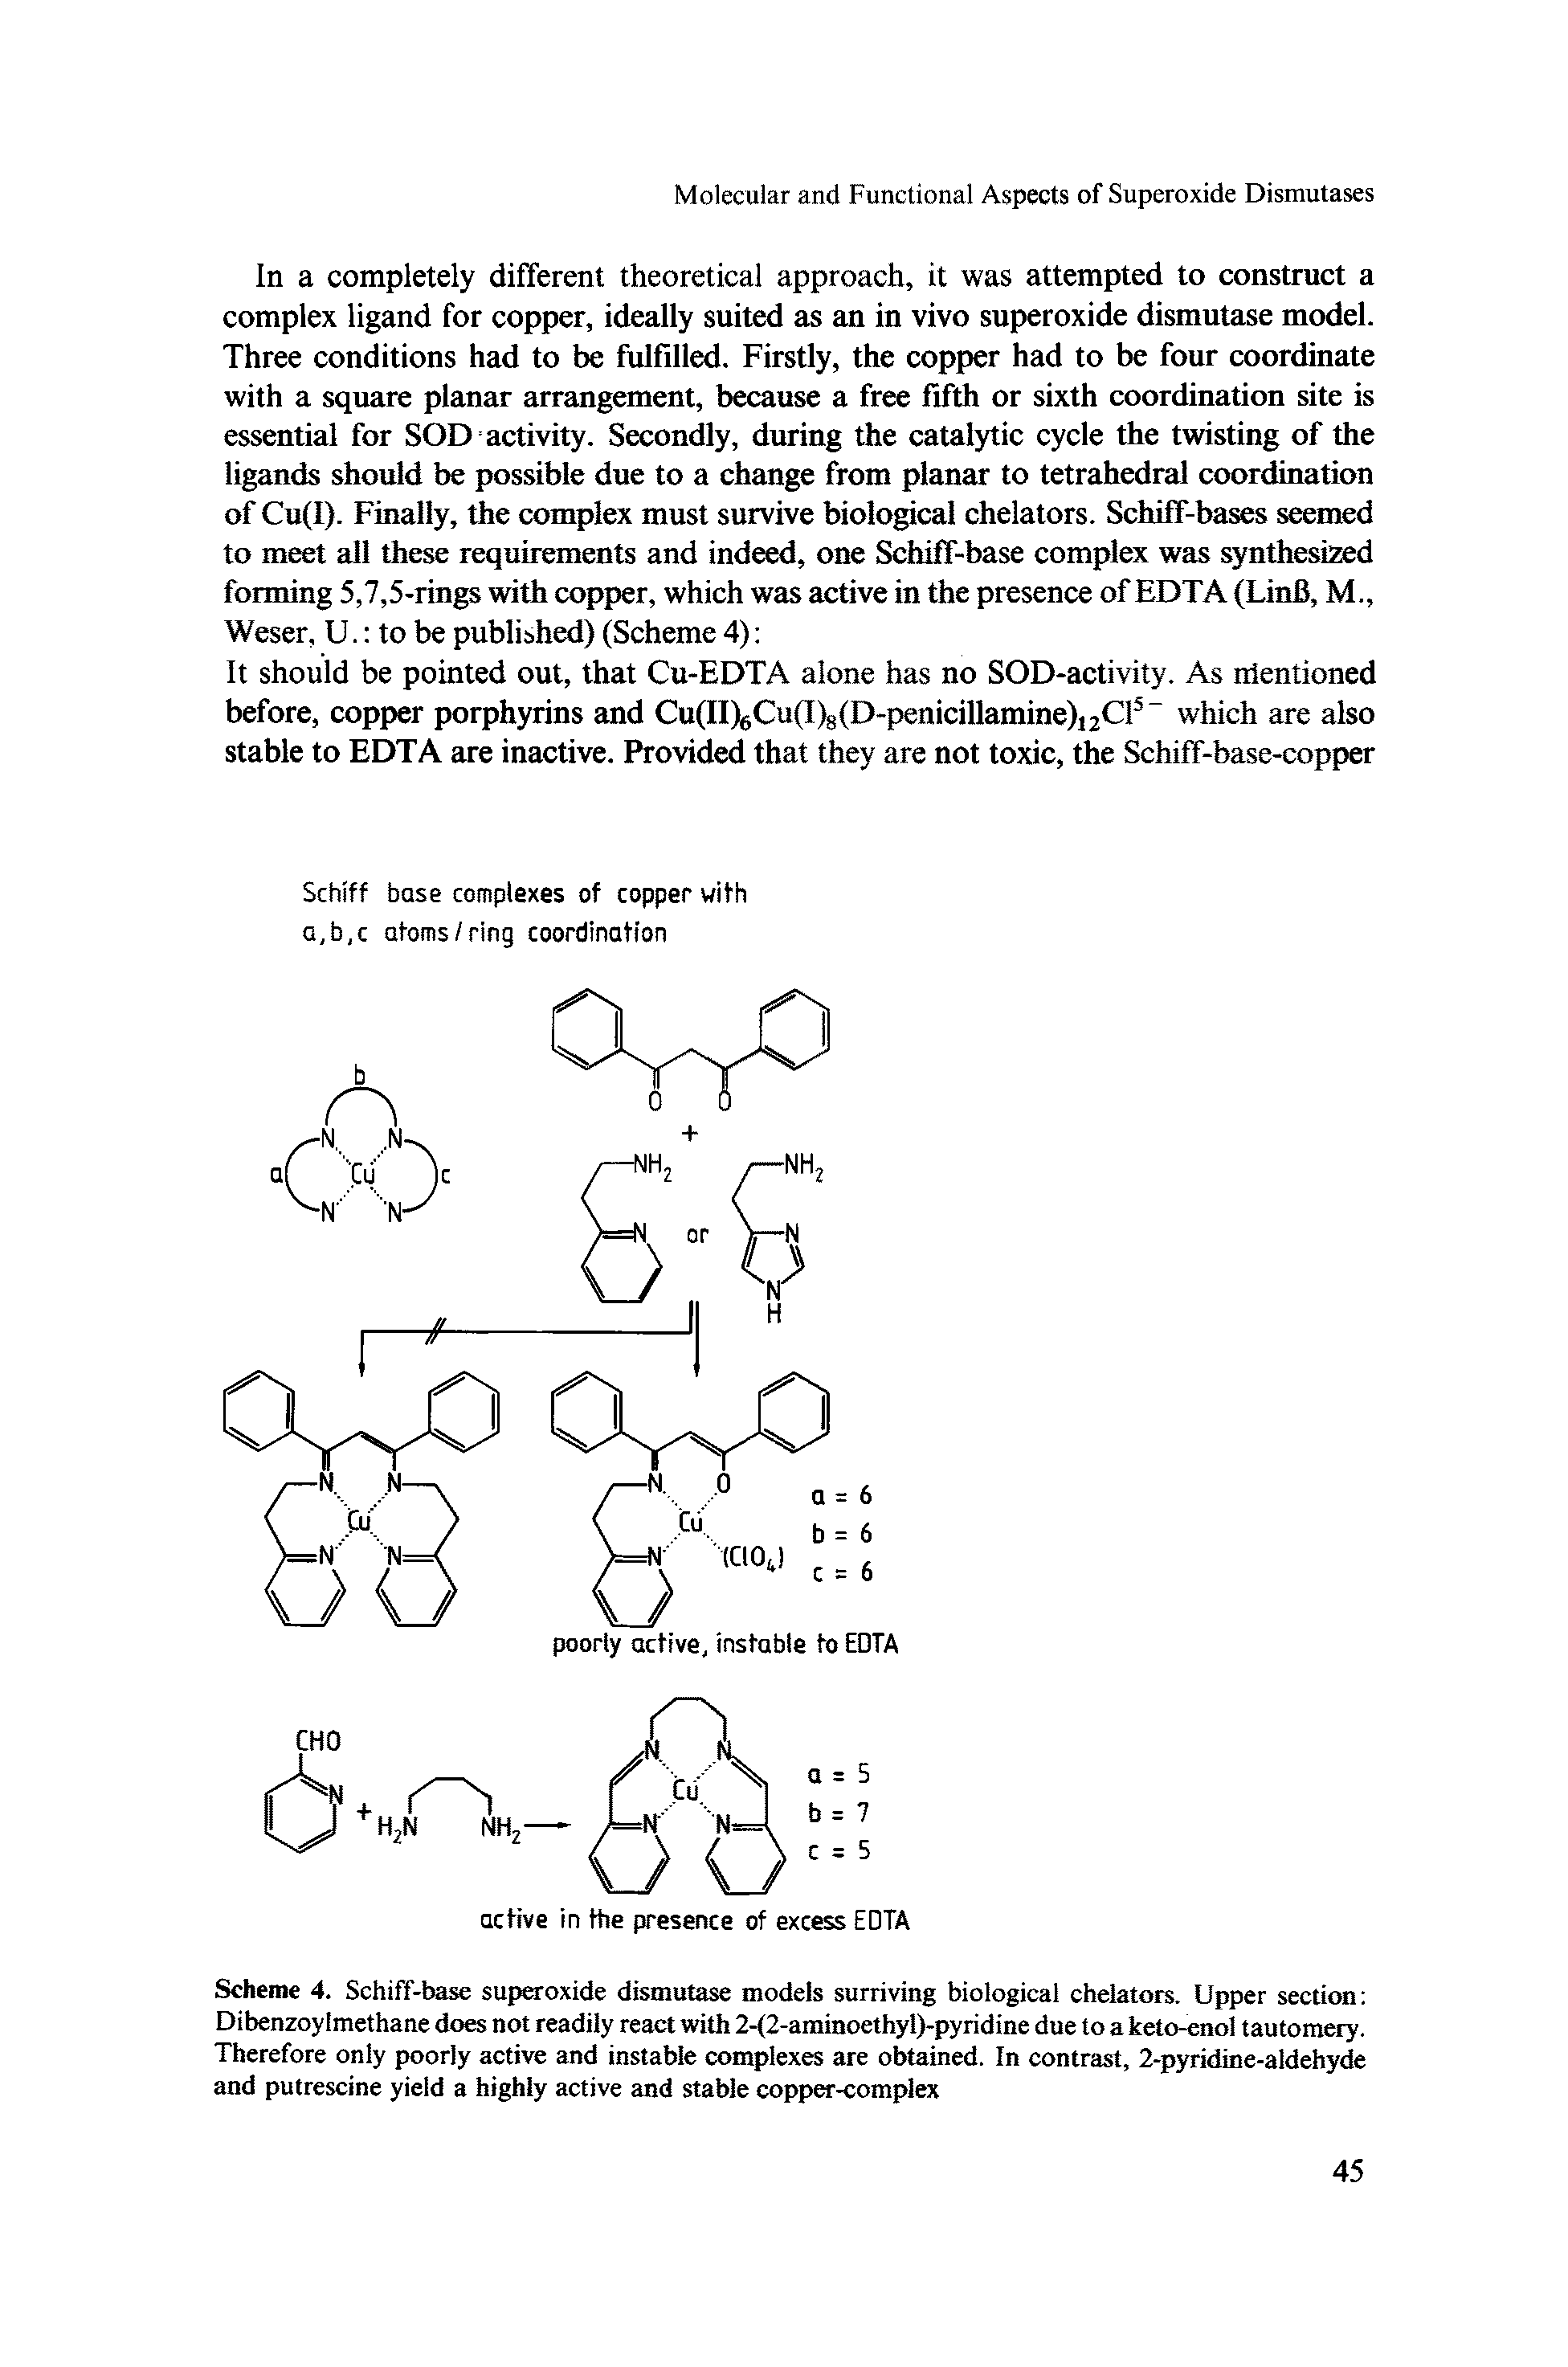 Scheme 4. Schiff-base superoxide dismutase models surriving biological chelators. Upper section Dibenzoy Imethane does not readily react with 2-(2-aminoethyl)-pyridine due to a keto-enol tautomery. Therefore only poorly active and instable complexes are obtained. In contrast, 2-pyridine-aldehyde and putrescine yield a highly active and stable copper<omplex...